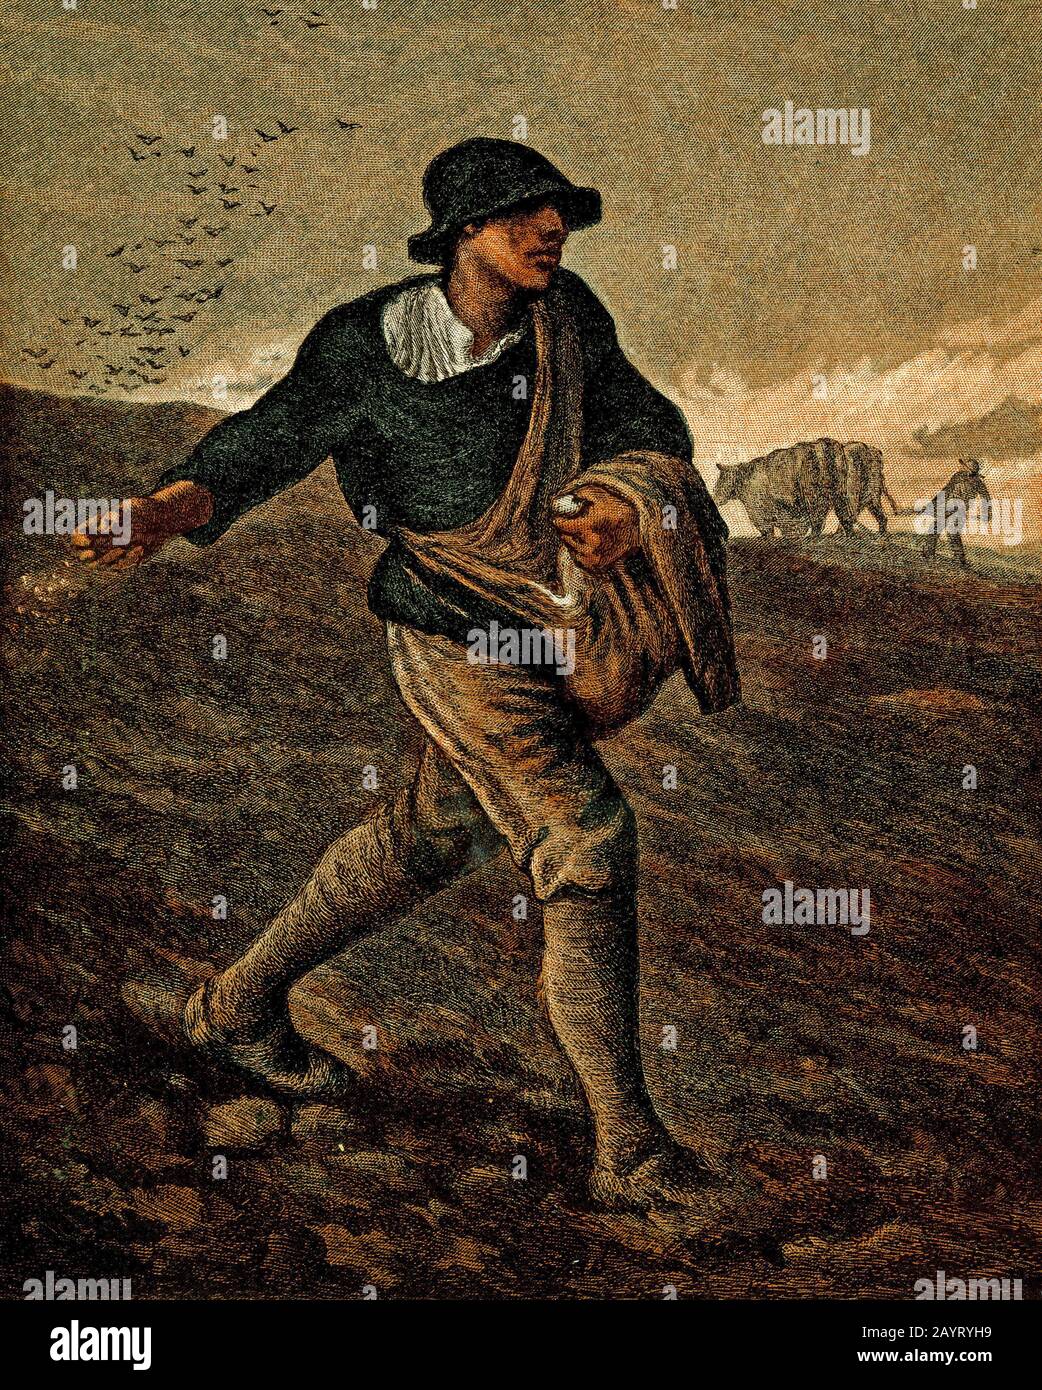 illustration of the painting titled 'The Sower' by Jean-François Millet (1814-1875) a French painter and one of the founders of the Barbizon School. Millet is noted for his scenes of peasant farmers and is categorized as part of the Realism art movement. Stock Photo